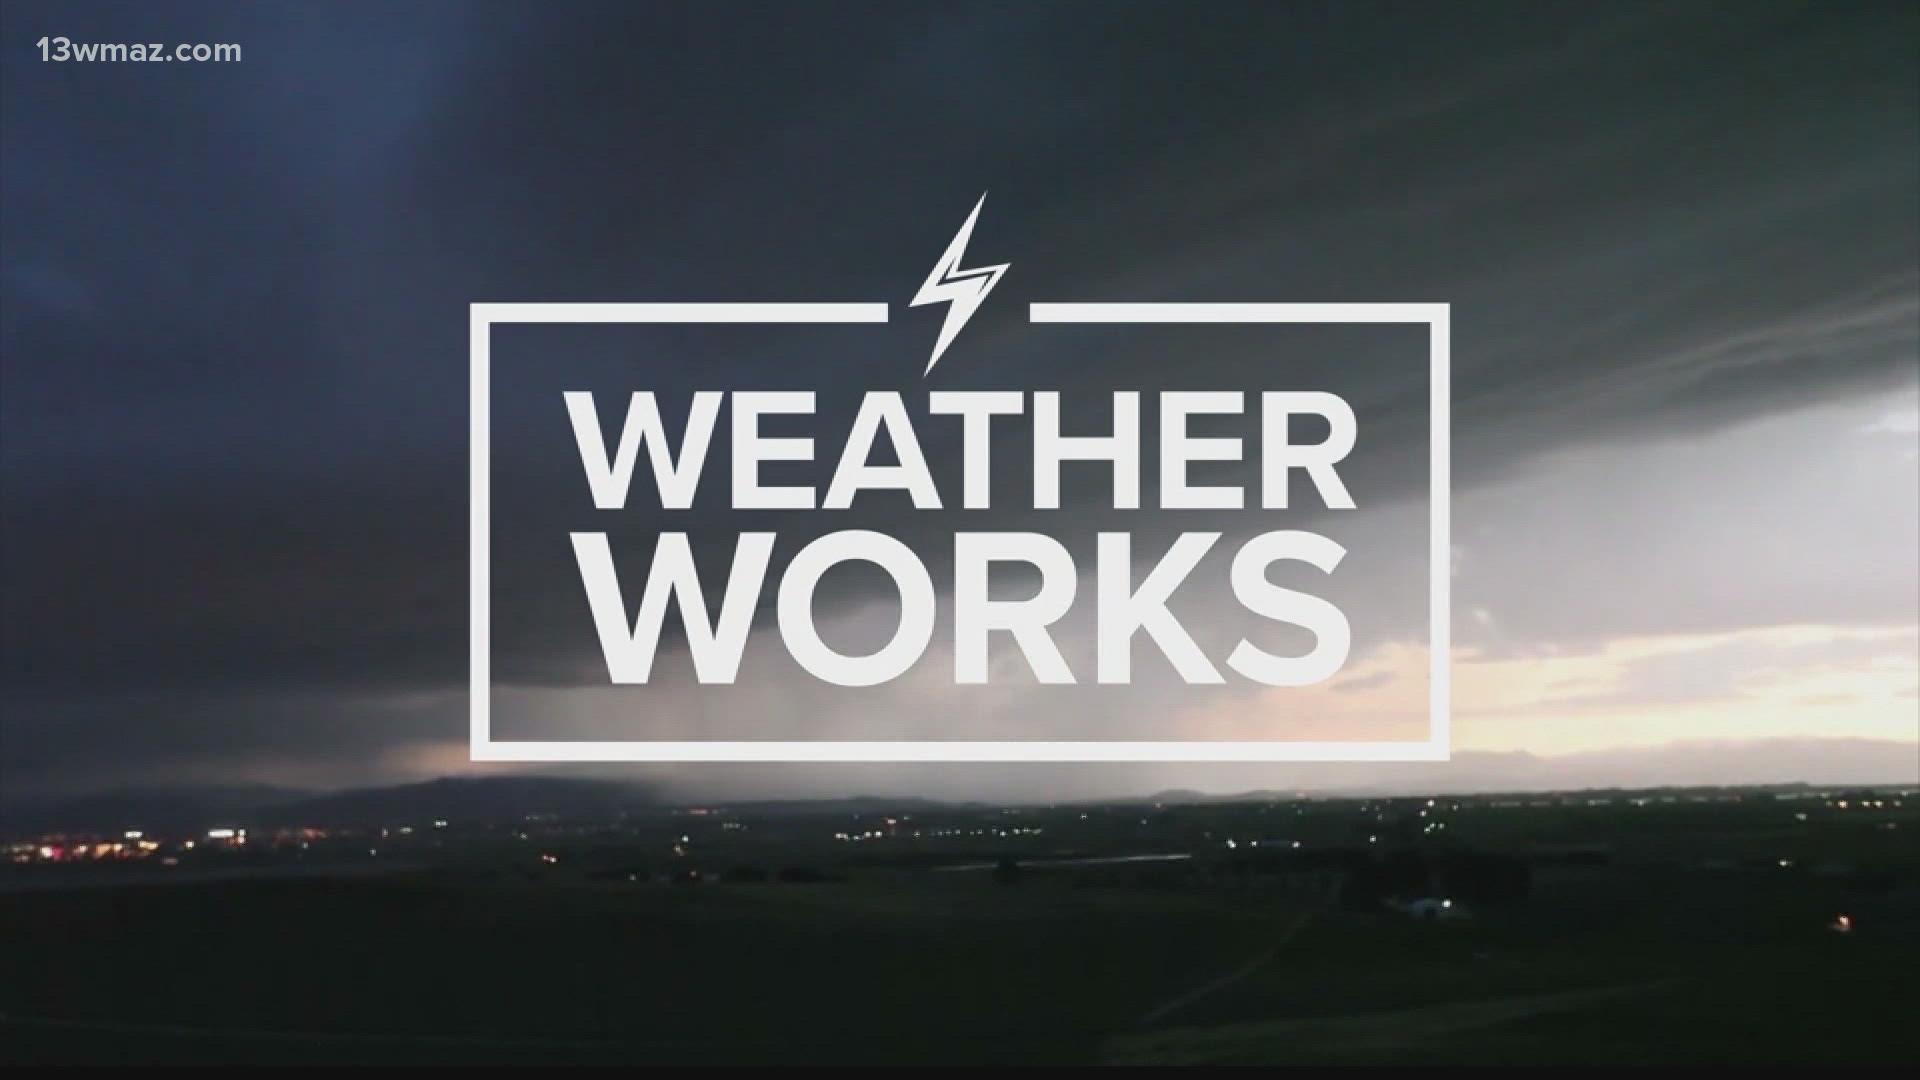 Meteorologist Taylor Stephenson explains how you can stay safe during this weather phenomenon.